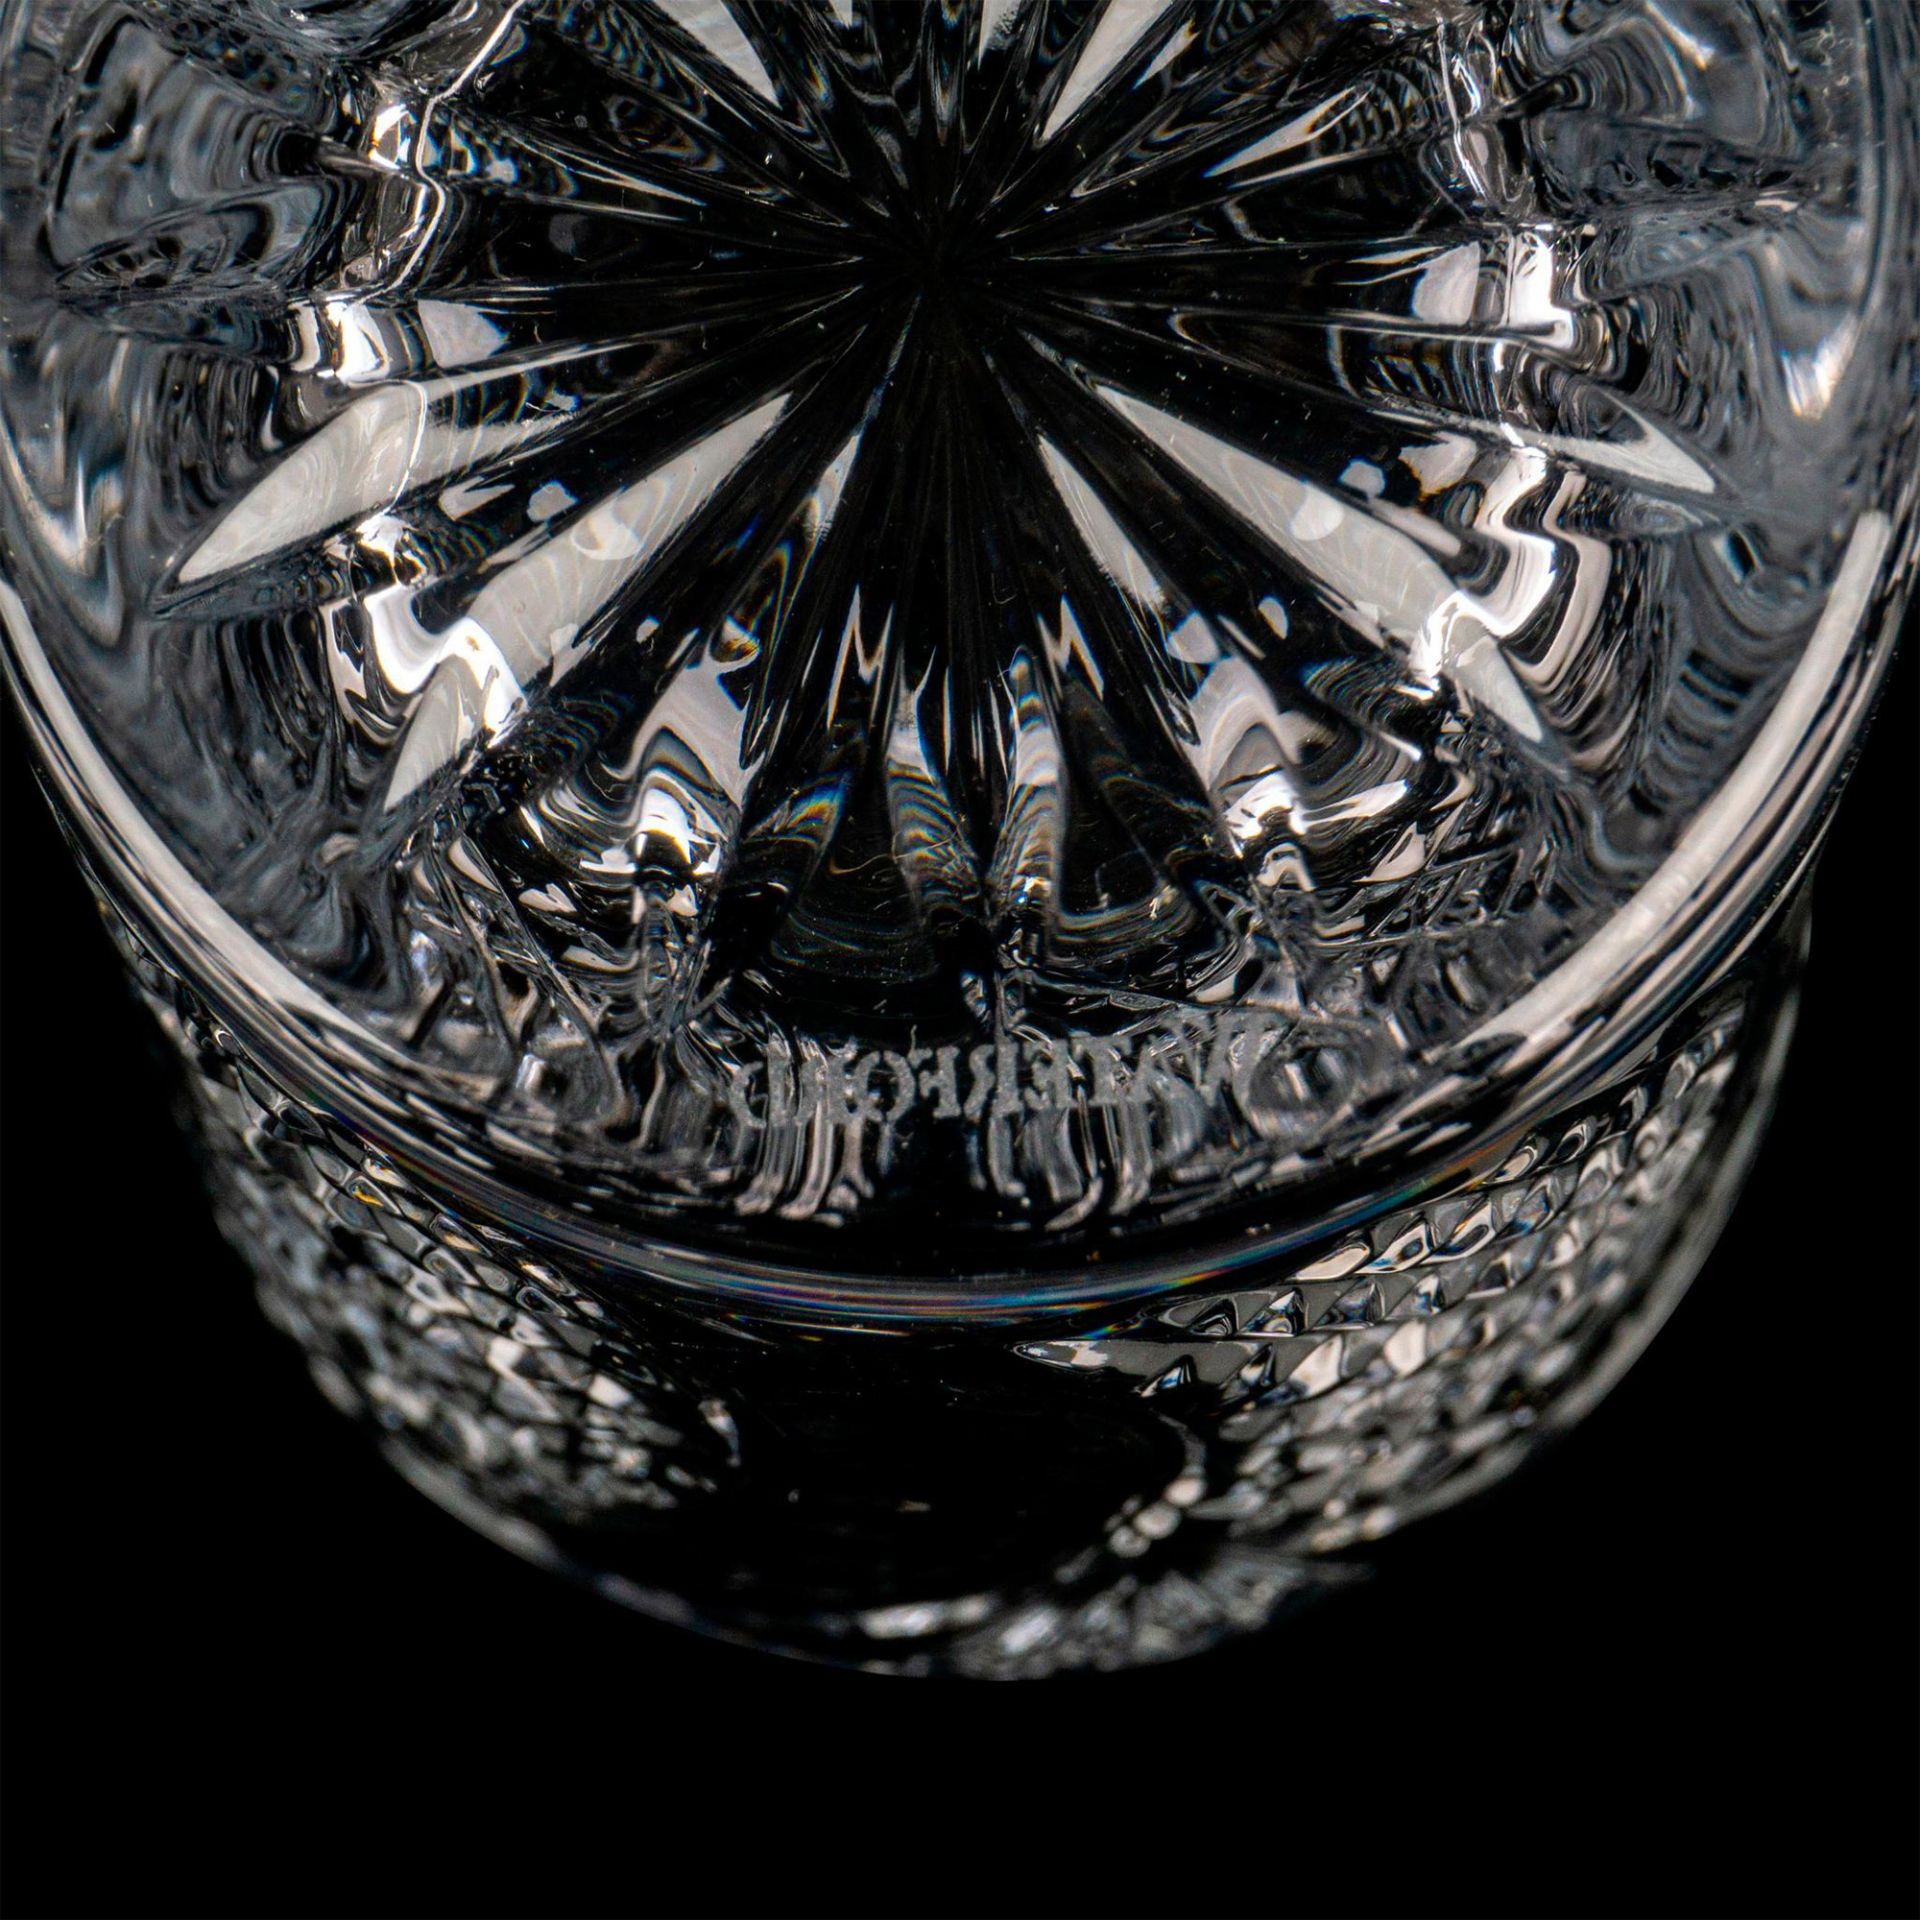 8pc Waterford Crystal Highball Glasses, Seahorse - Image 3 of 3